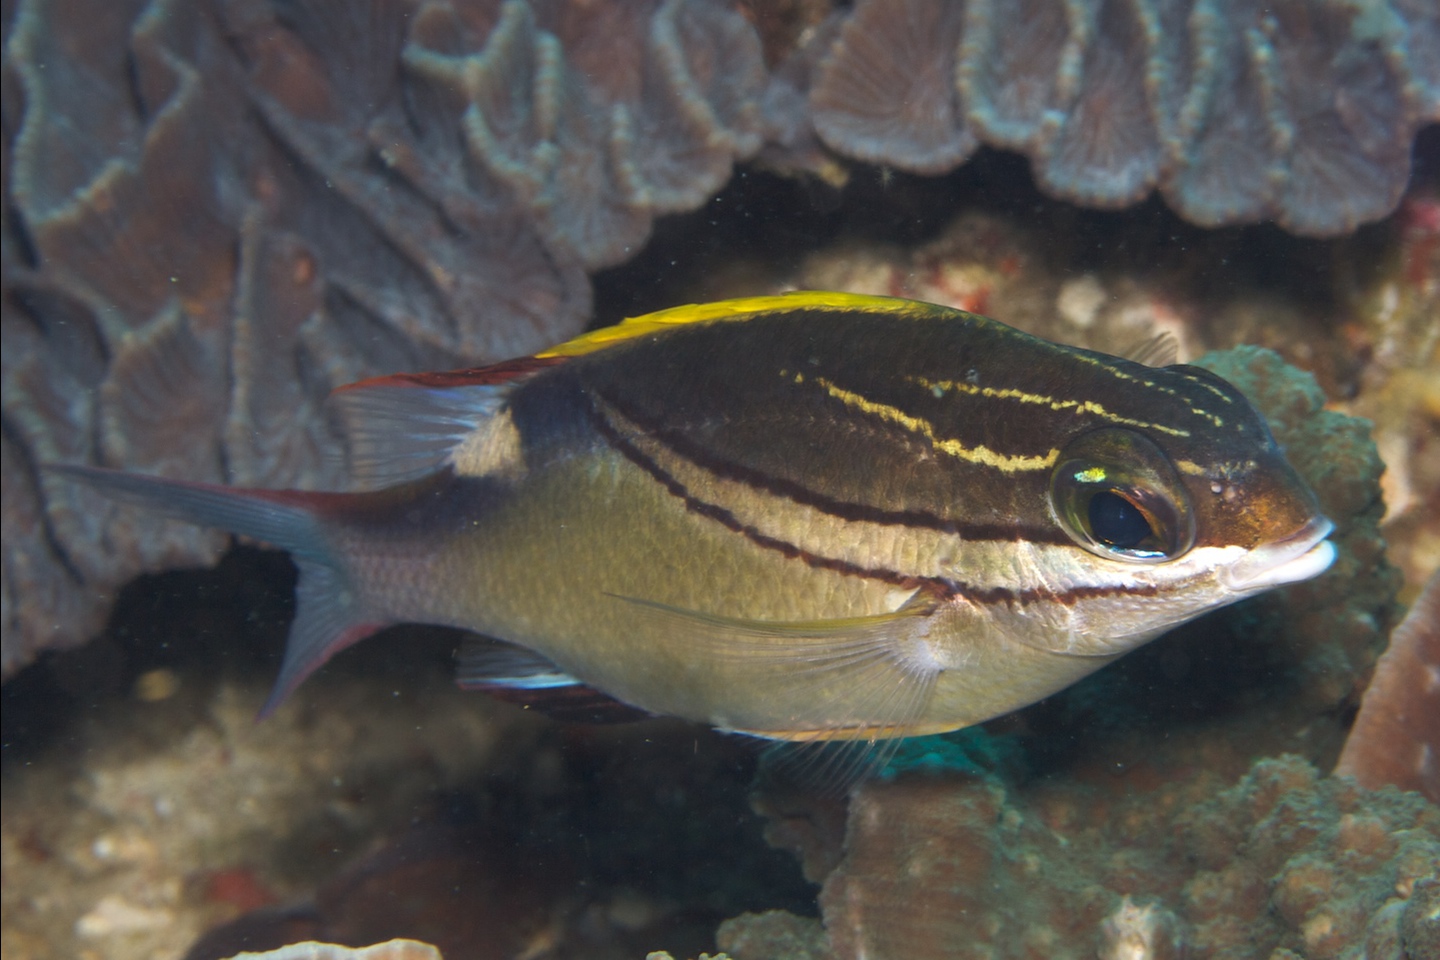 Two-lined monocle bream